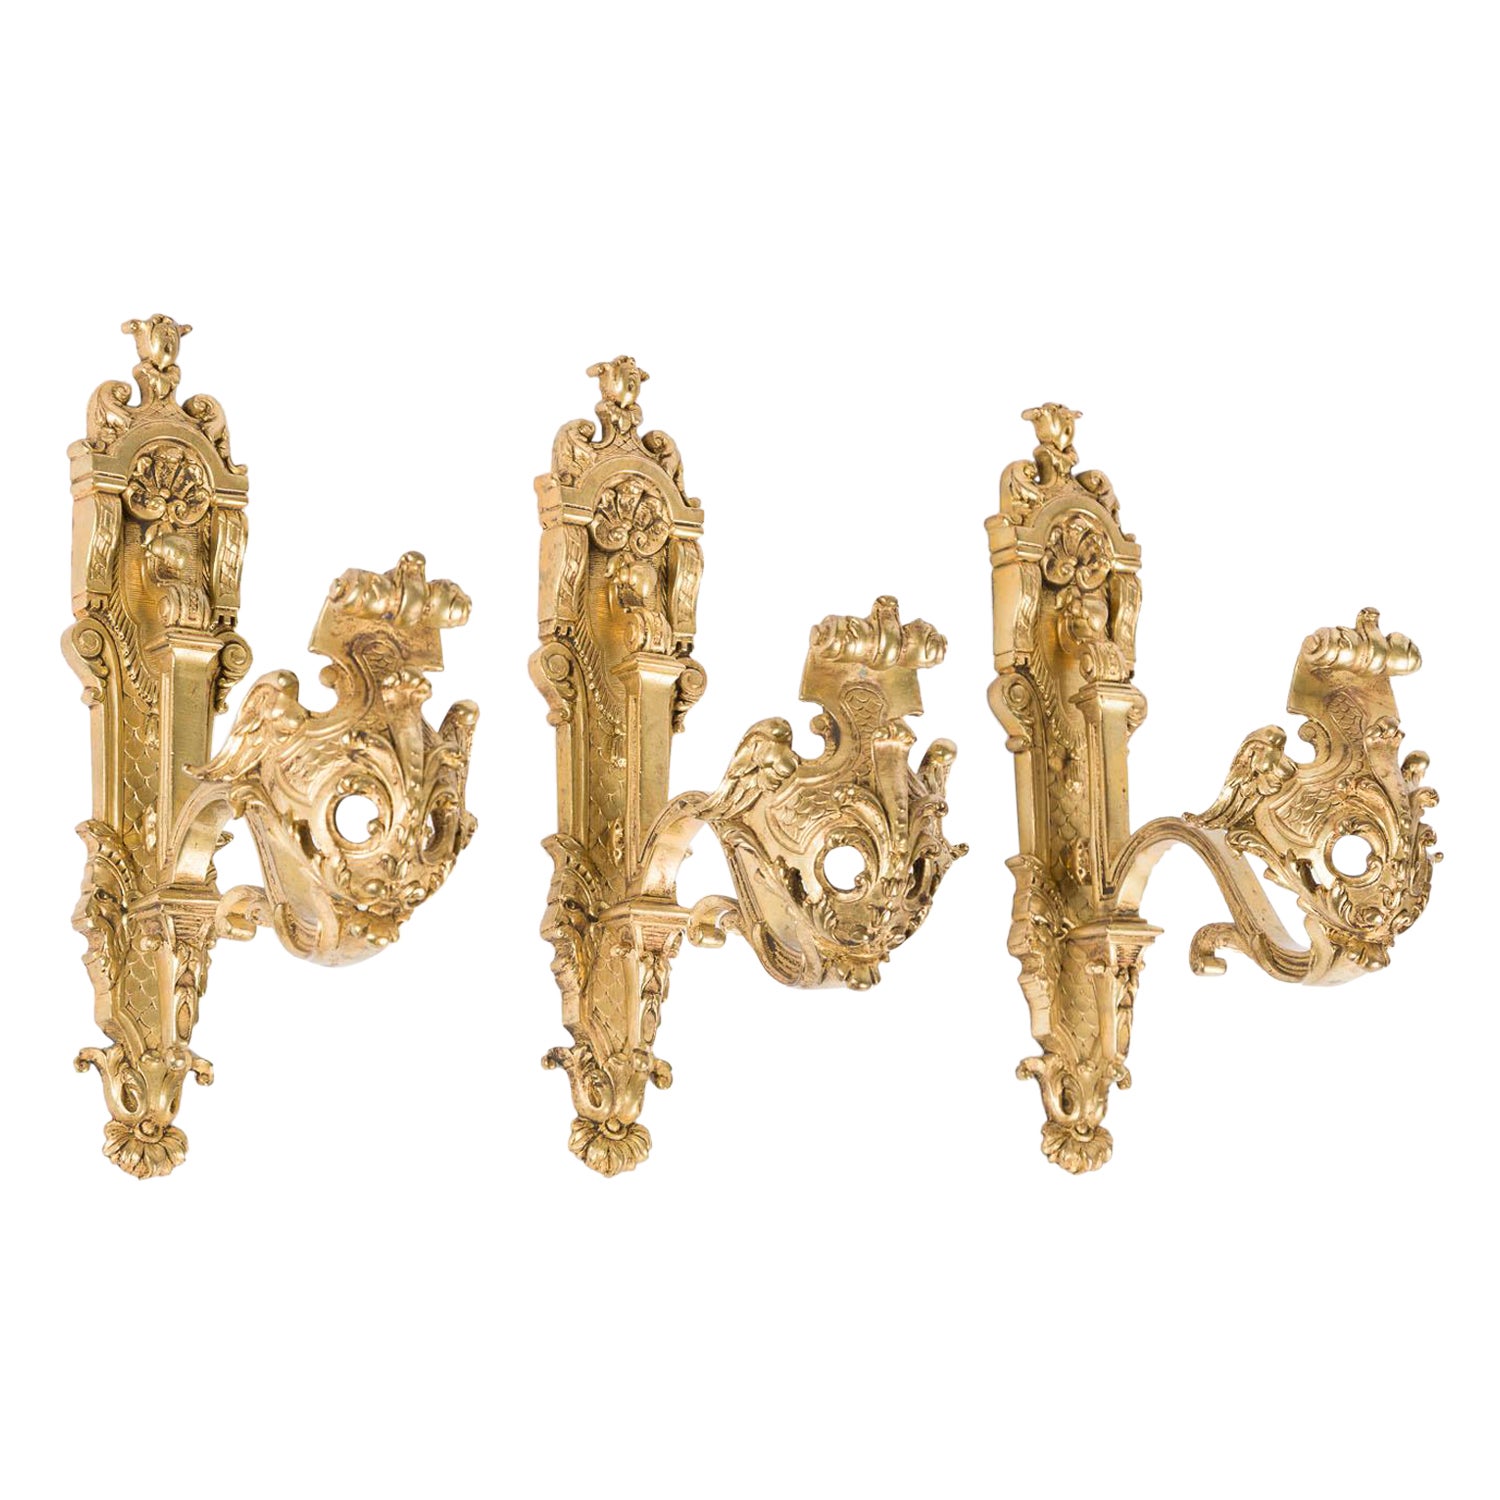 Set of 3 ornate gilt bronze curtain hooks in the Louis XV style